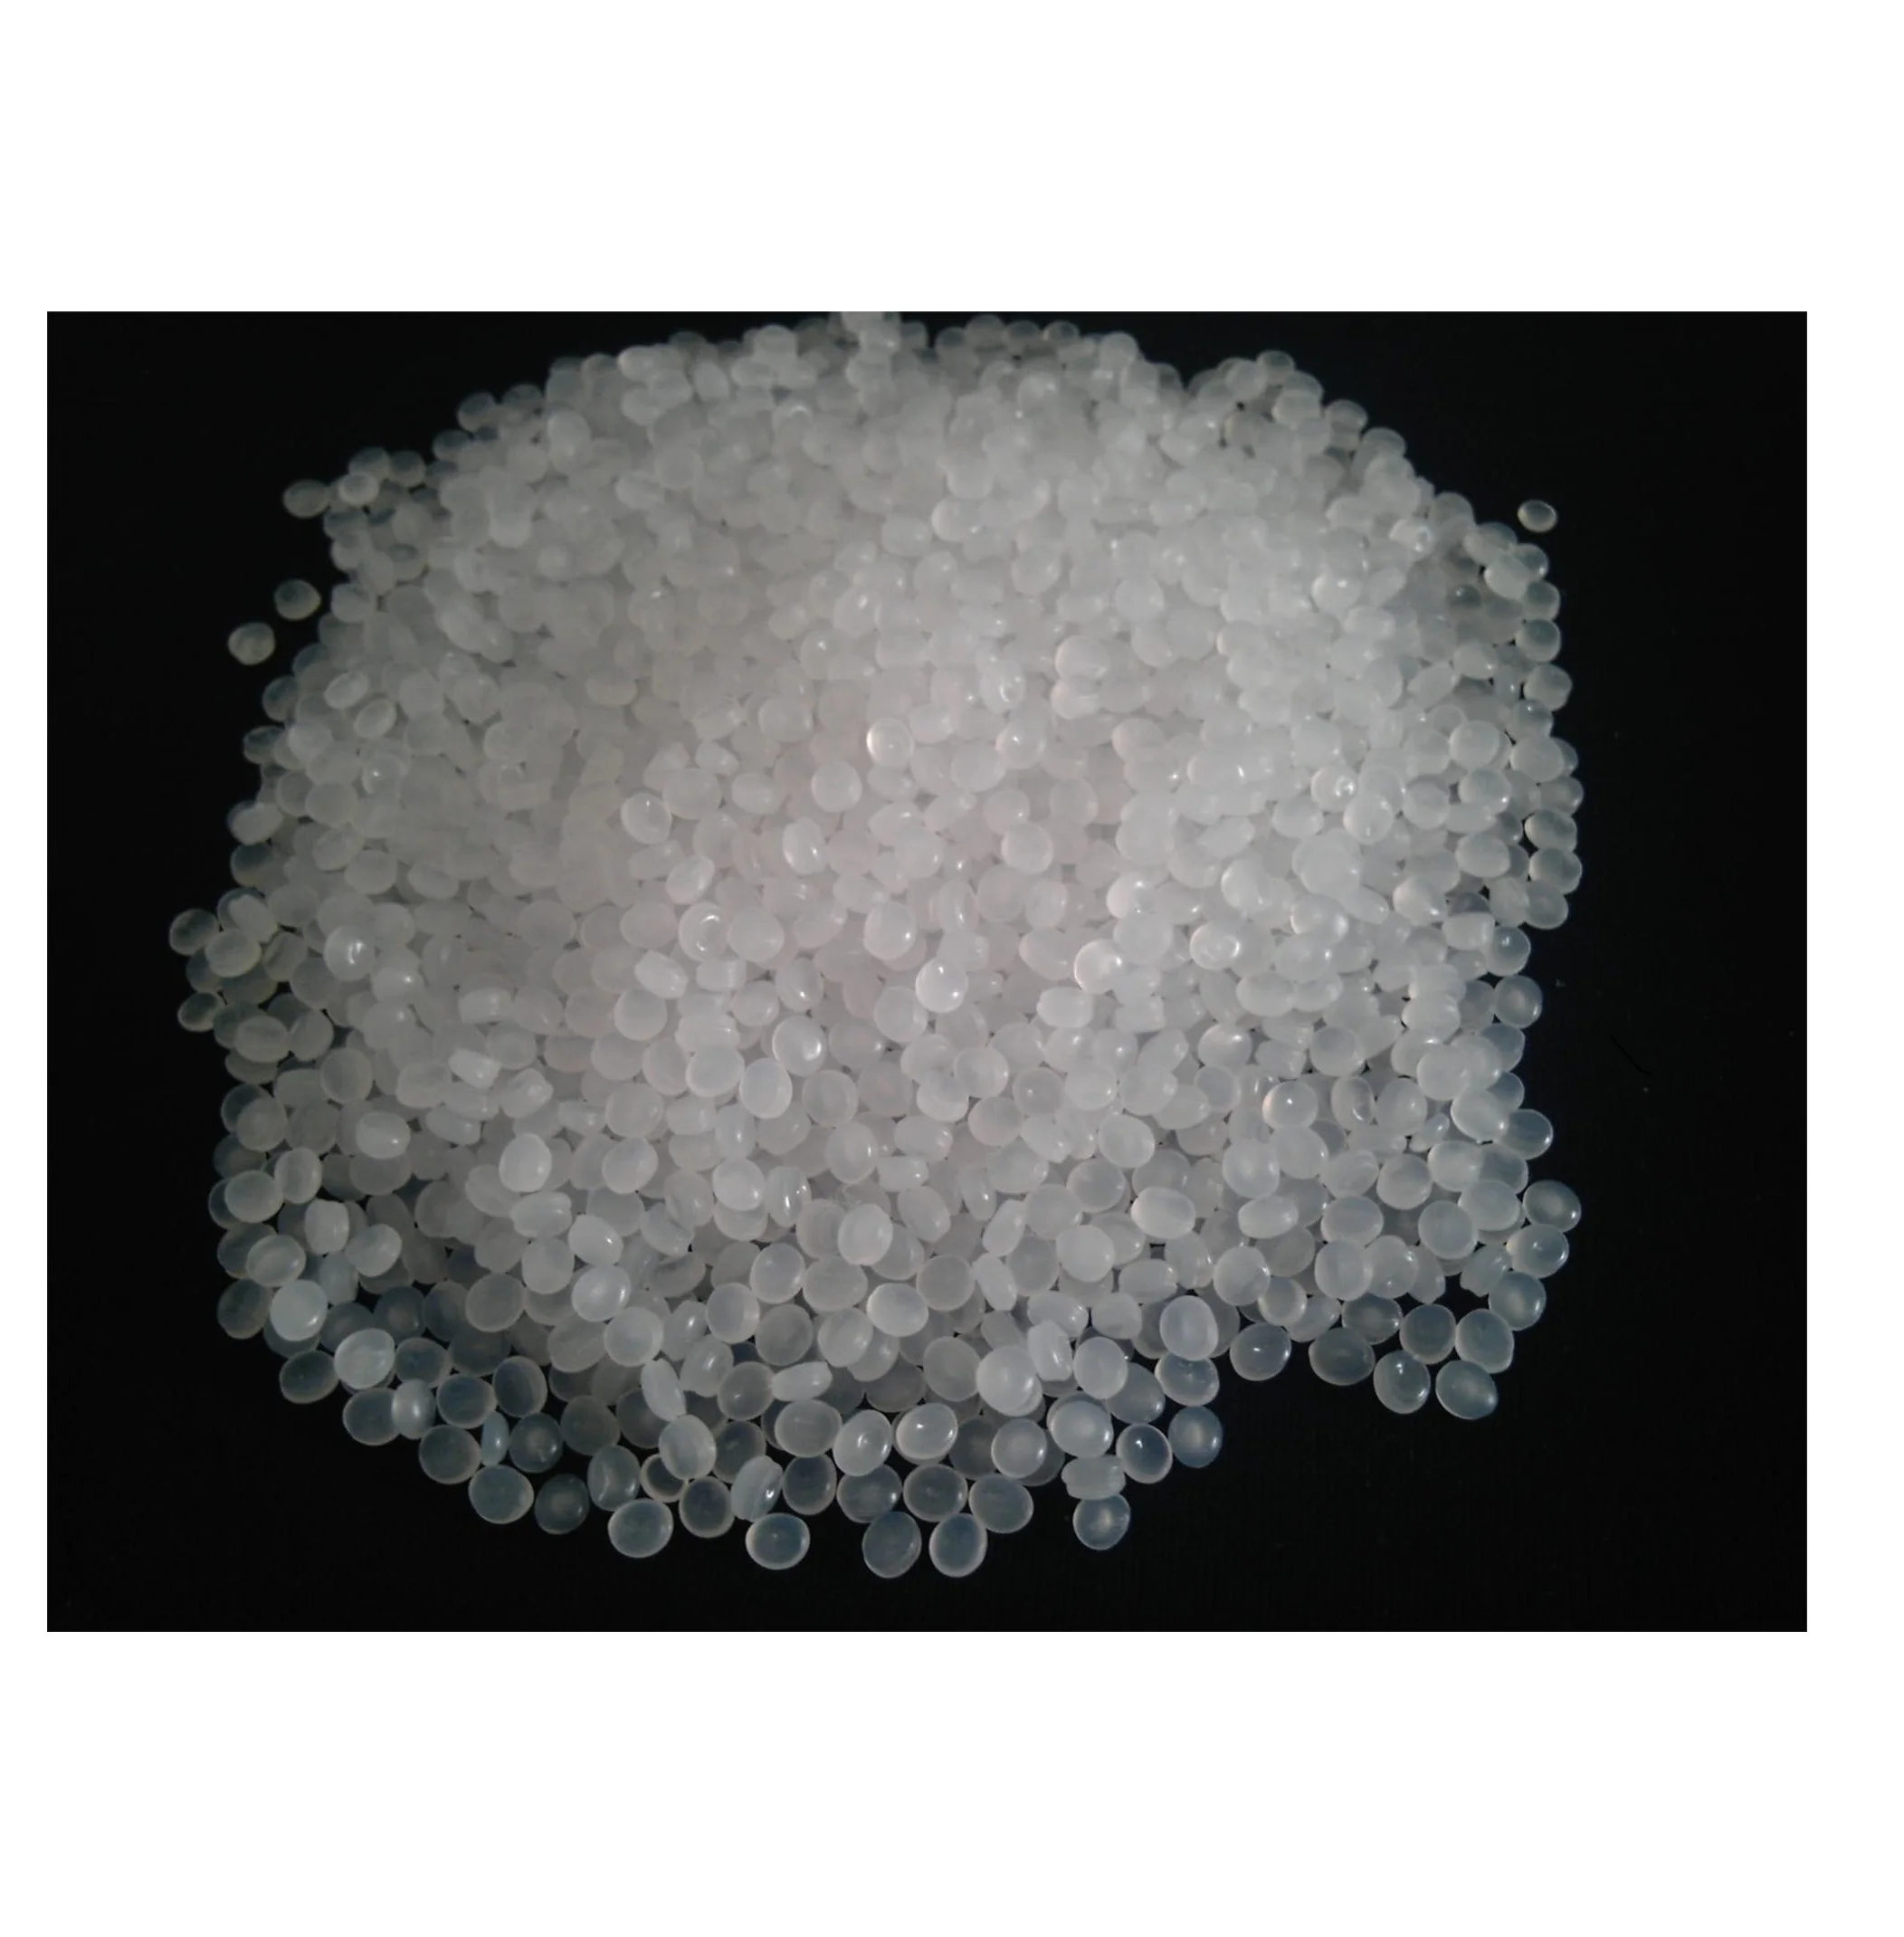 low price recycled hdpe granules Virgin&Recycled HDPE/LDPE/LLDPE/PP